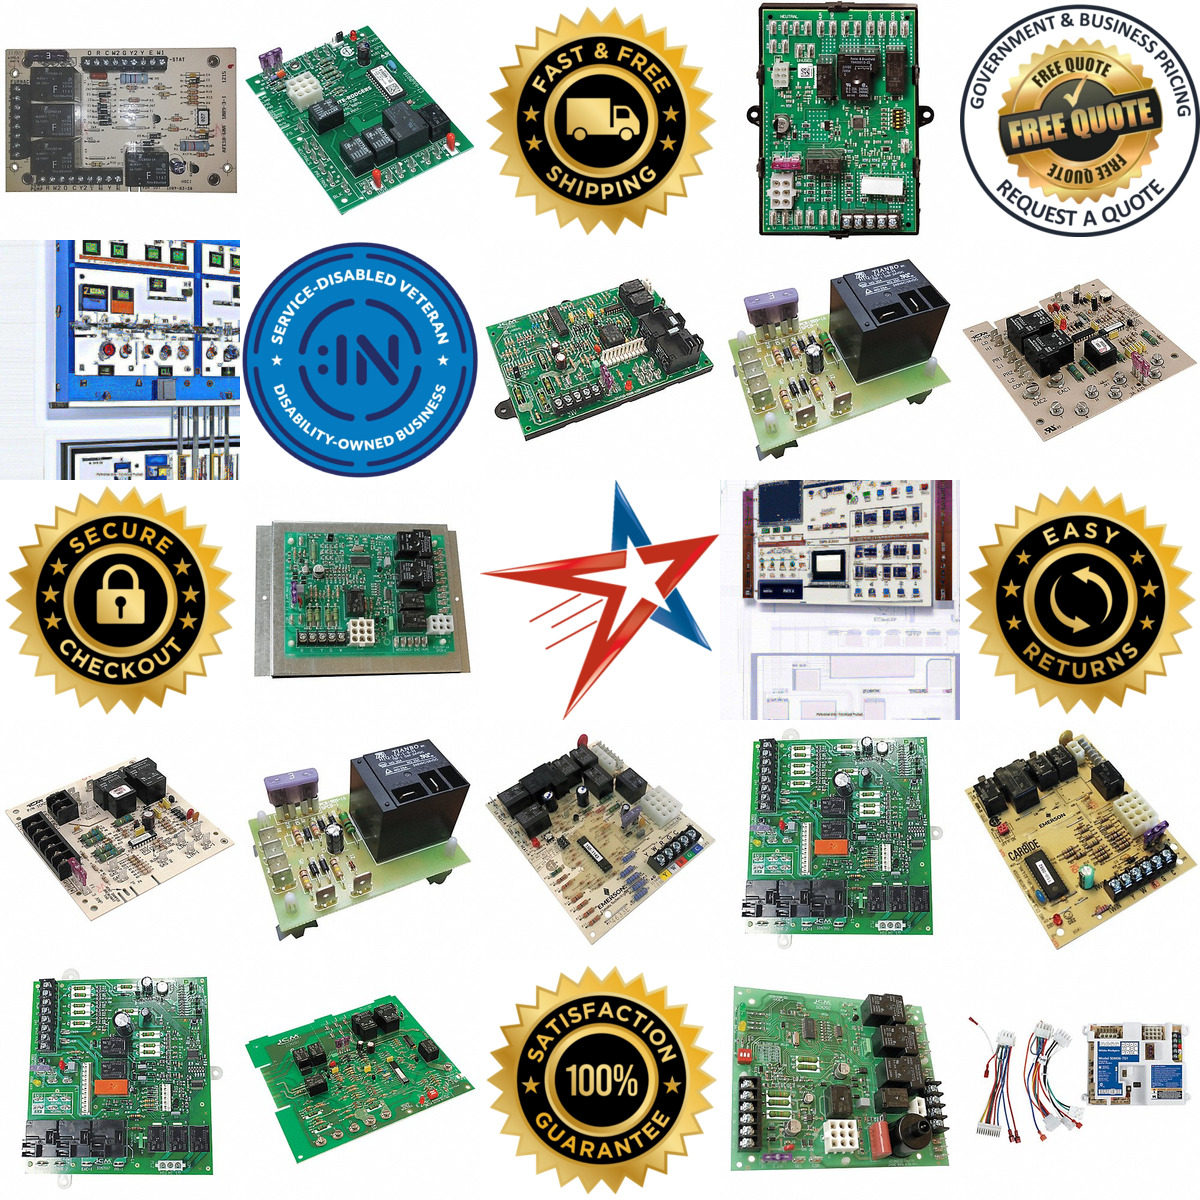 A selection of Furnace Control Boards products on GoVets